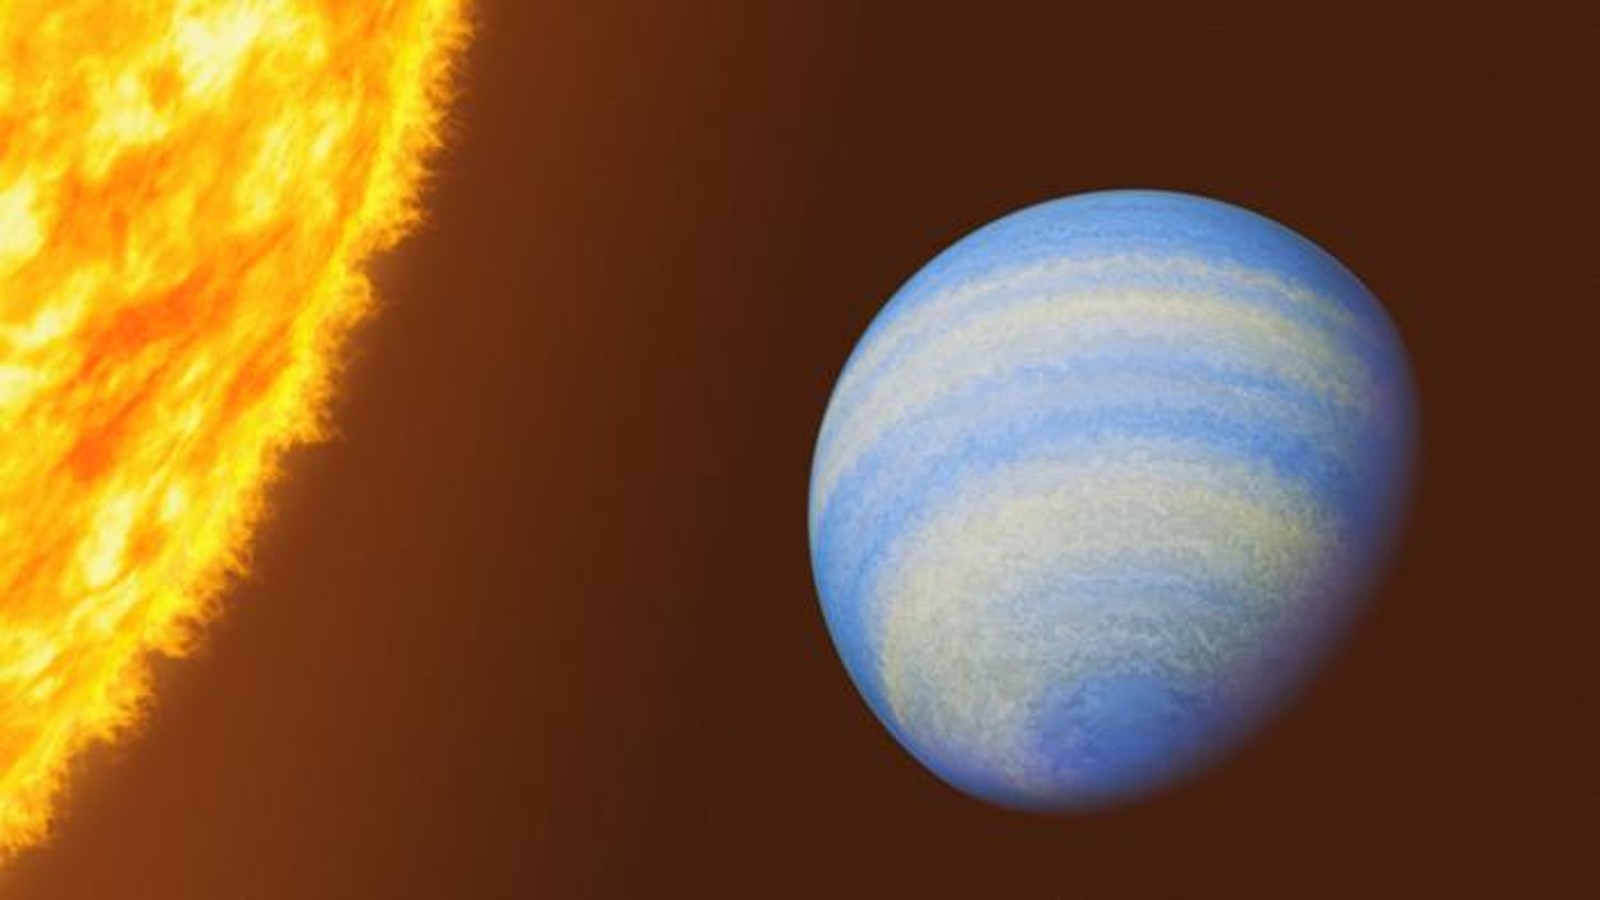  James Webb telescope reveals rare, 'rotten egg' atmosphere around nearby hell planet 